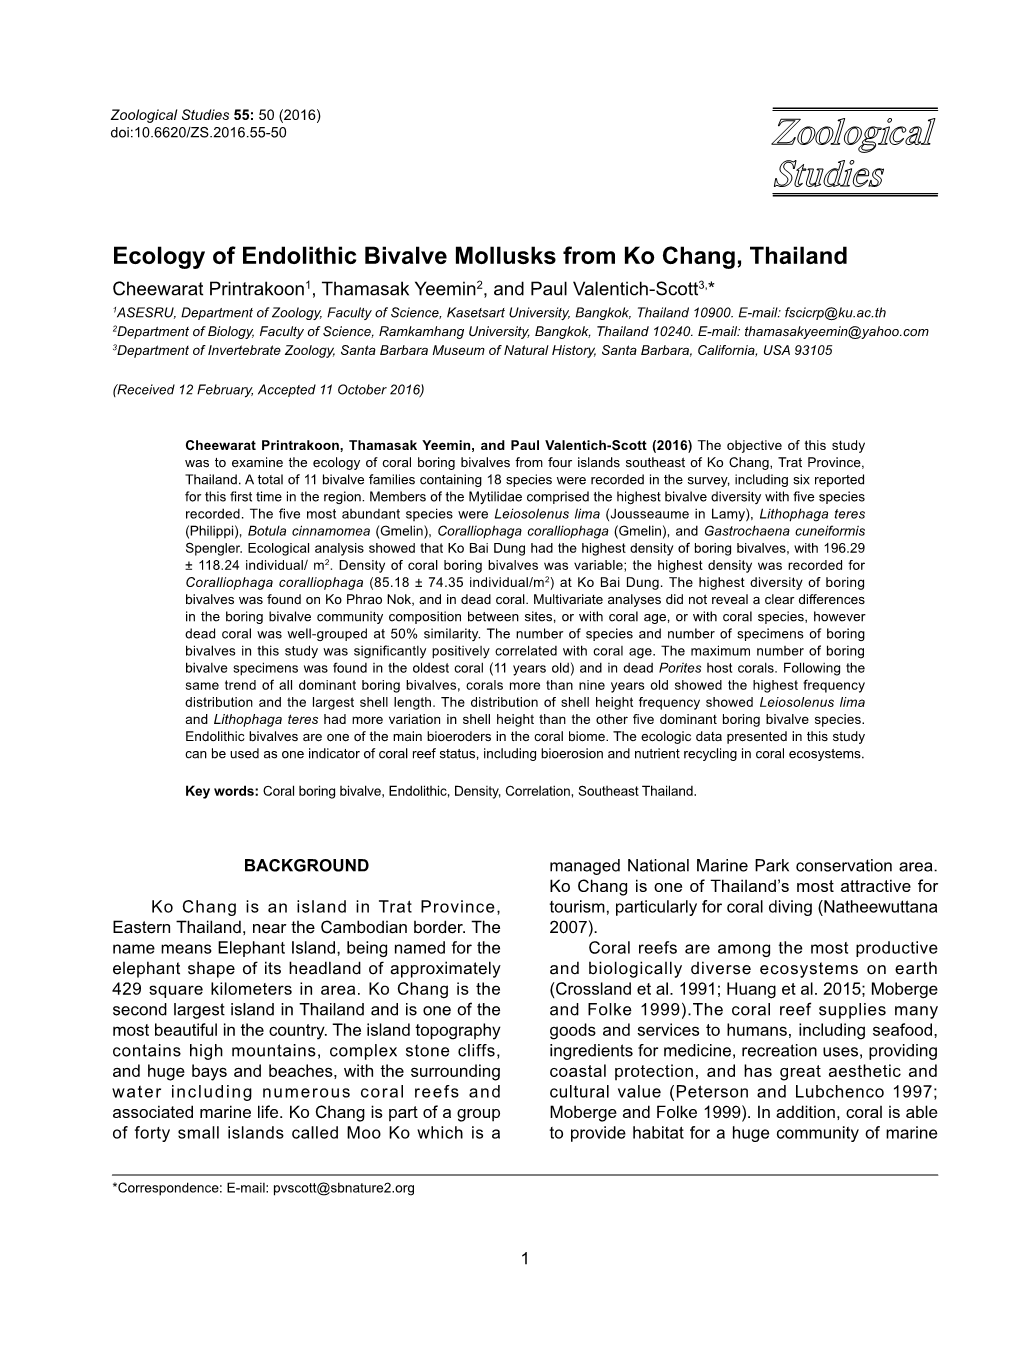 Ecology of Endolithic Bivalve Mollusks from Ko Chang, Thailand